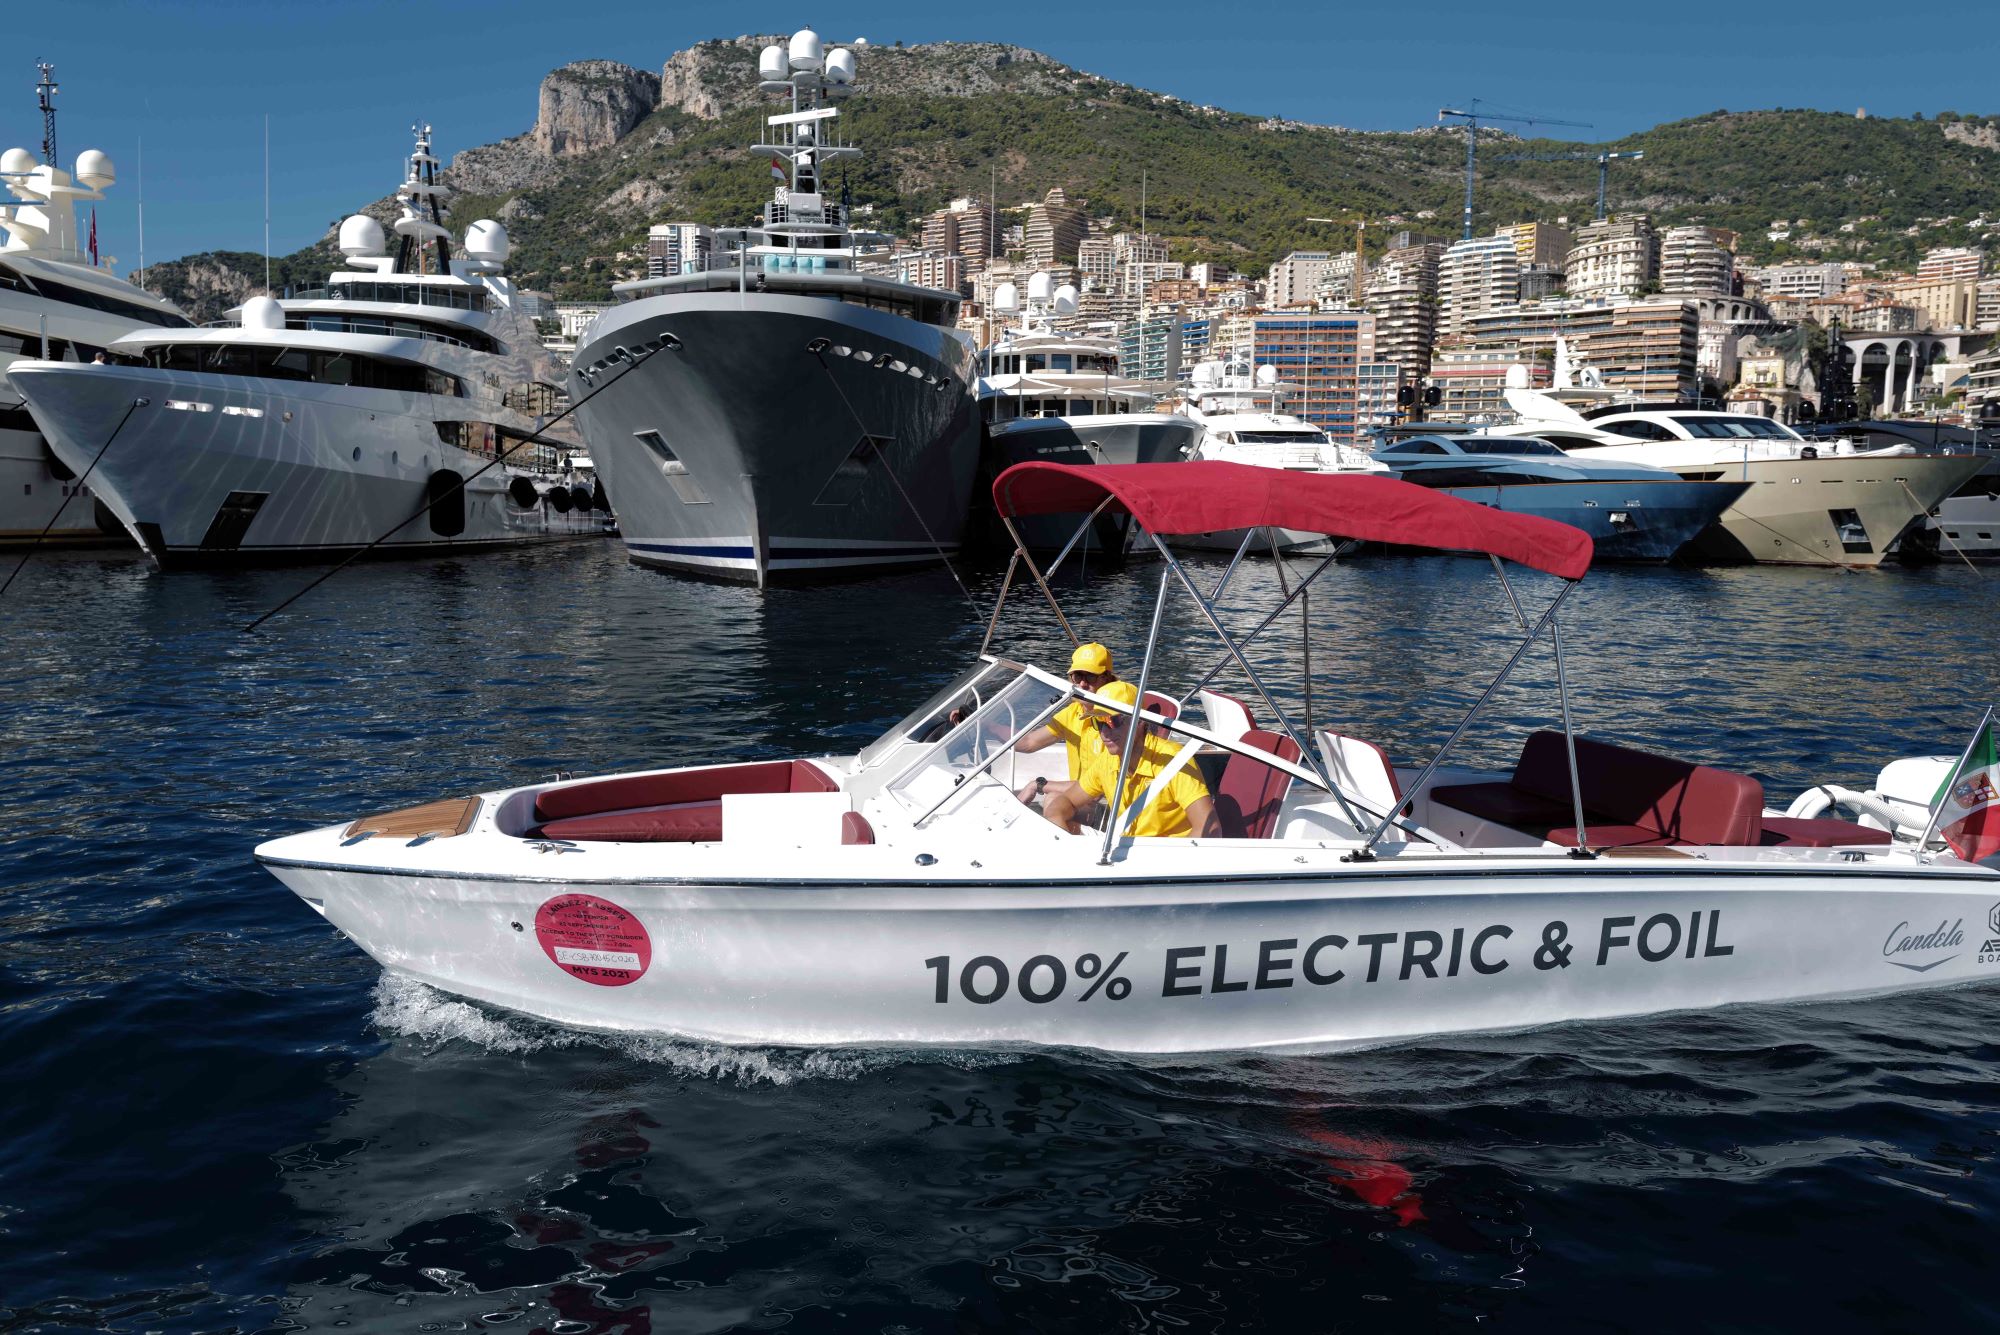 A boat with Electric on the side on the water.